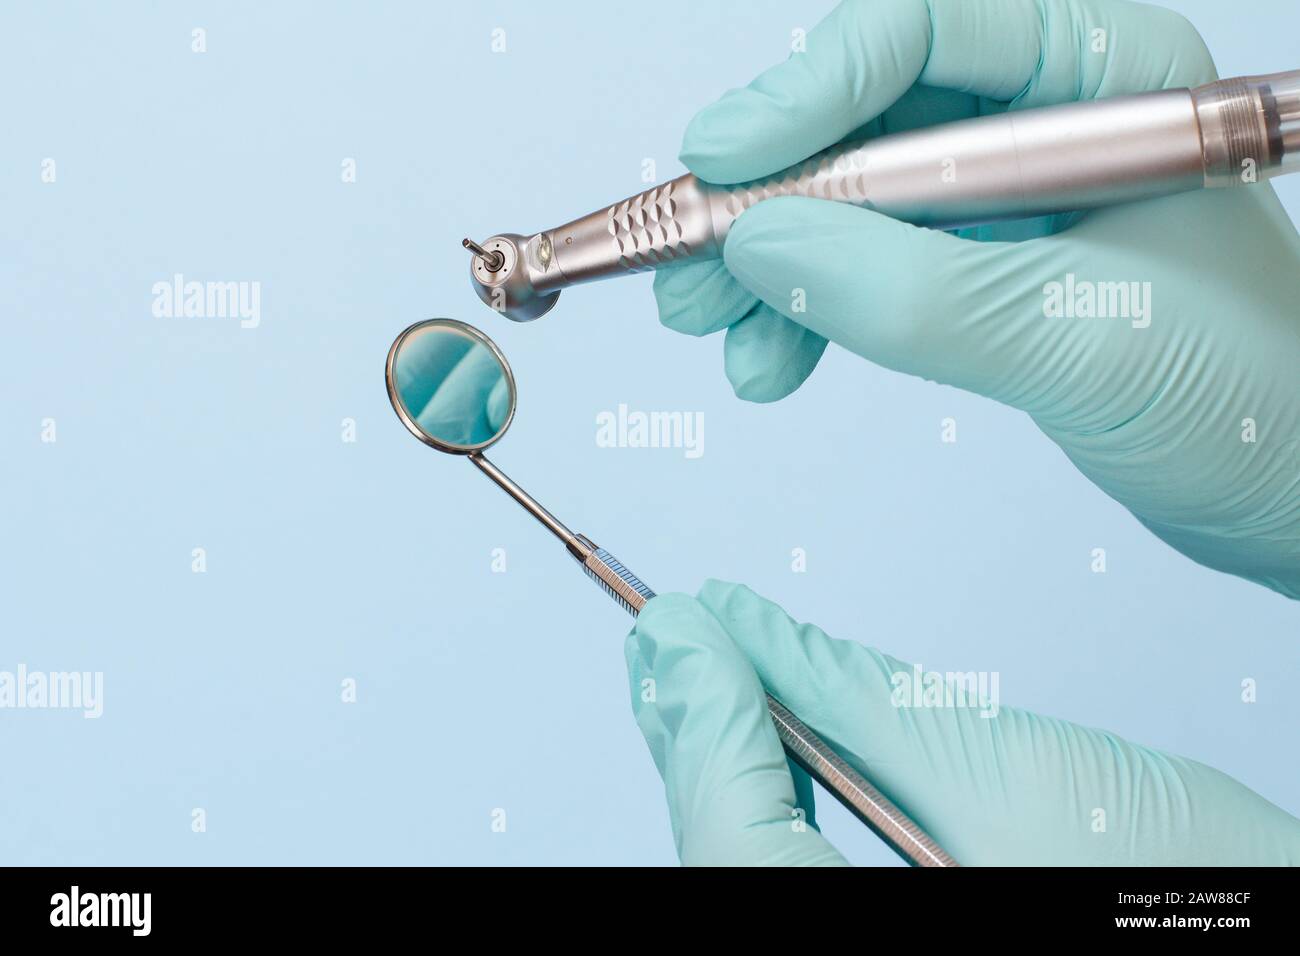 Dentist's hands in pink latex gloves with high-speed dental handpiece and mouth mirror on blue background. Medical tools concept. Stock Photo